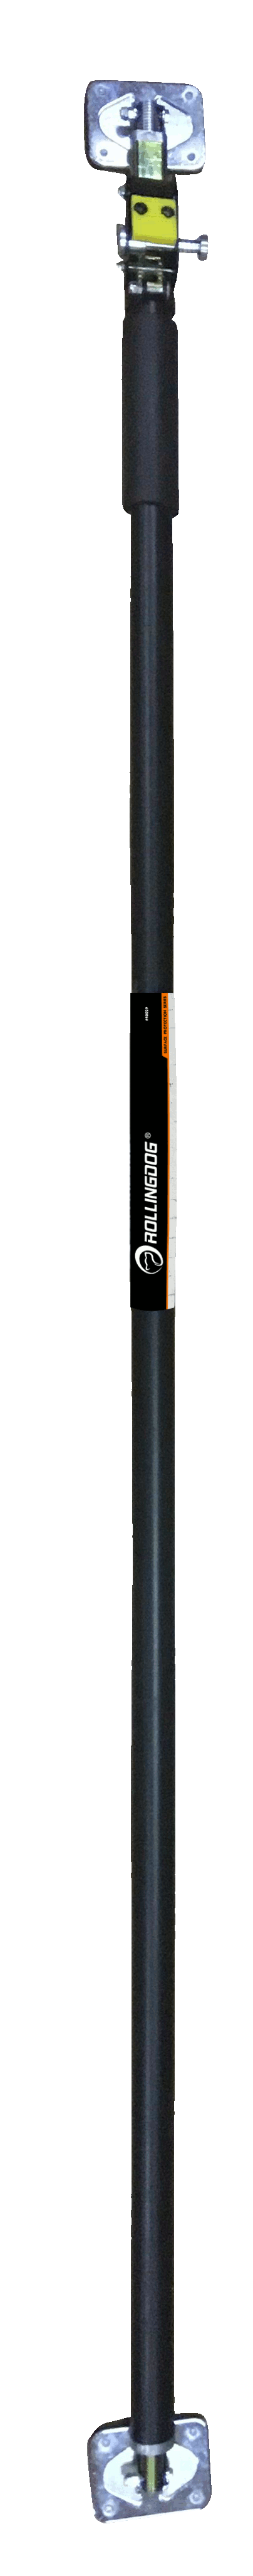 Sturdy Support Rod                                                                                                                                                                                      